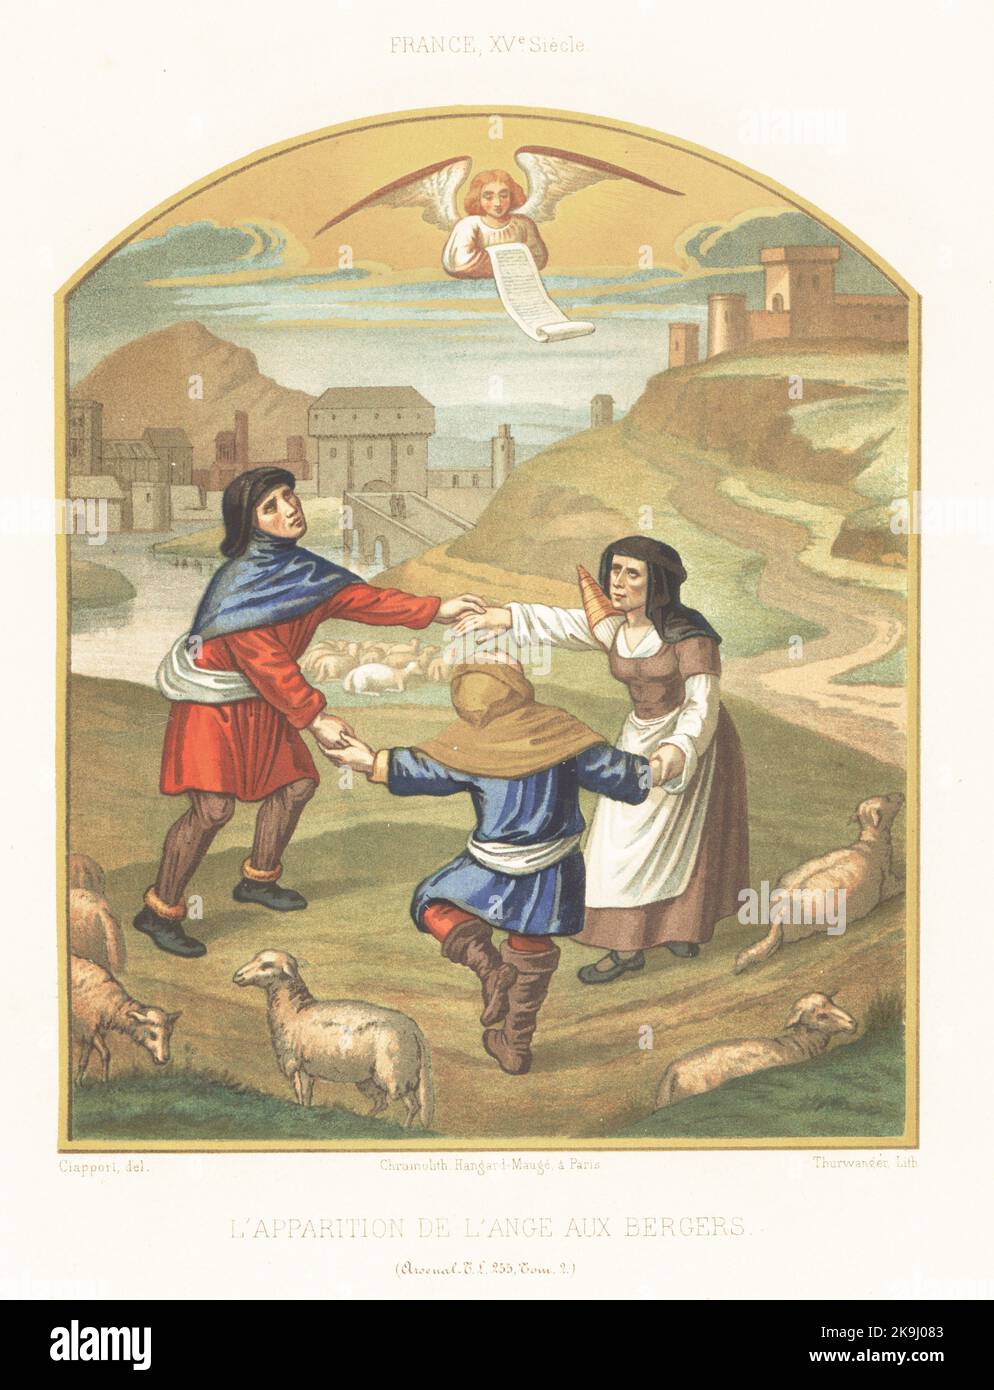 The apparation of the angel to shepherds dancing in a field. In the costume of Flemish rustics, 15th century. L'apparation de l'ange aux bergers. XVe siecle. Taken from a Book of Hours, livre d'heures, MS Tl 255, Tom. 2, Bibliotheque de l'Arsenal. Chromolithograph by Thurwanger after an illustration by Claudius Joseph Ciappori from Charles Louandre’s Les Arts Somptuaires, The Sumptuary Arts, Hangard-Mauge, Paris, 1858. Stock Photo